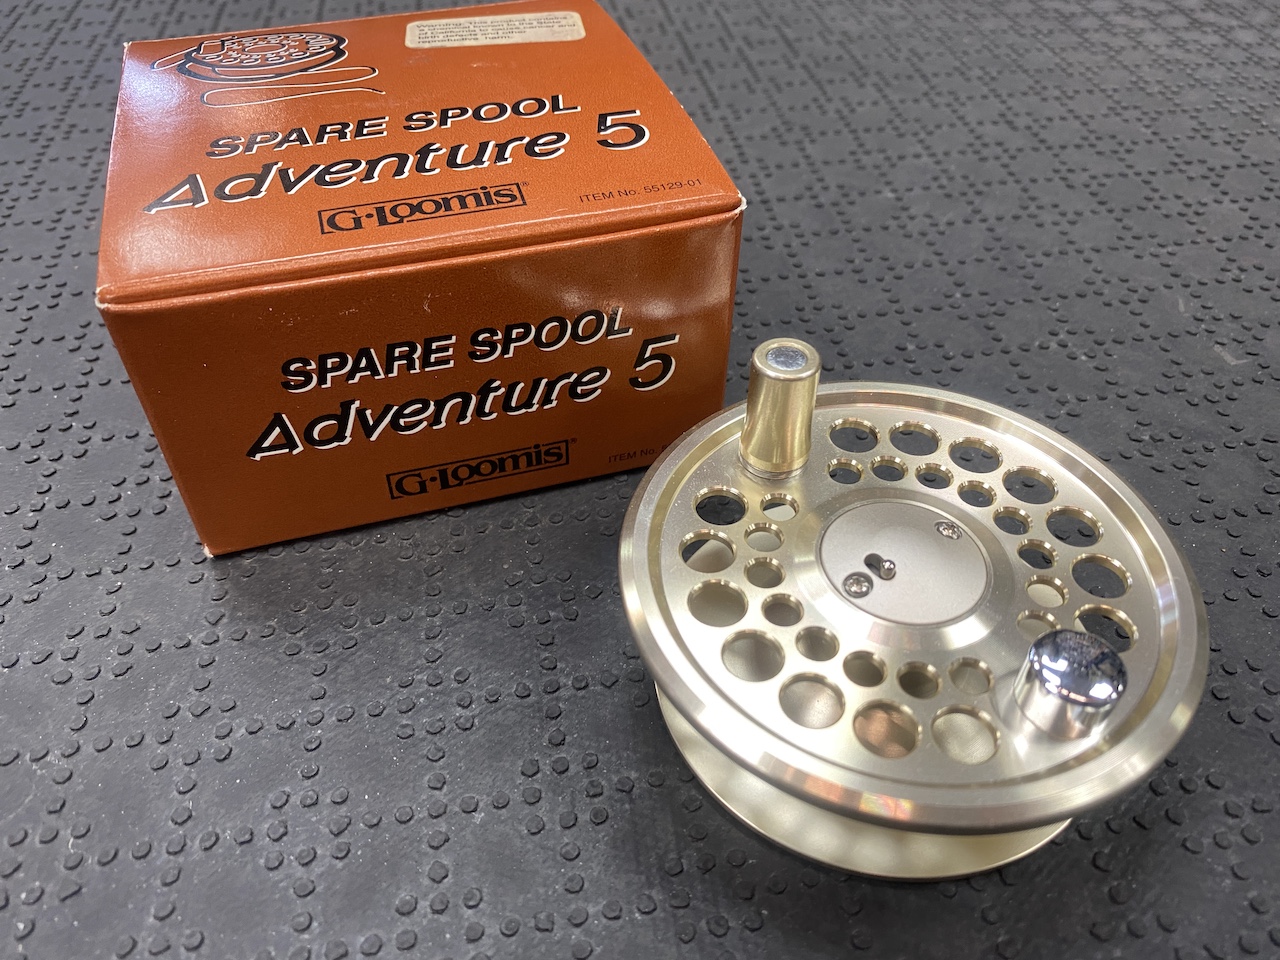 https://thefirstcast.ca/wp-content/uploads/2021/03/G-Loomis-Adventure-5-Spare-Spool-A.jpg